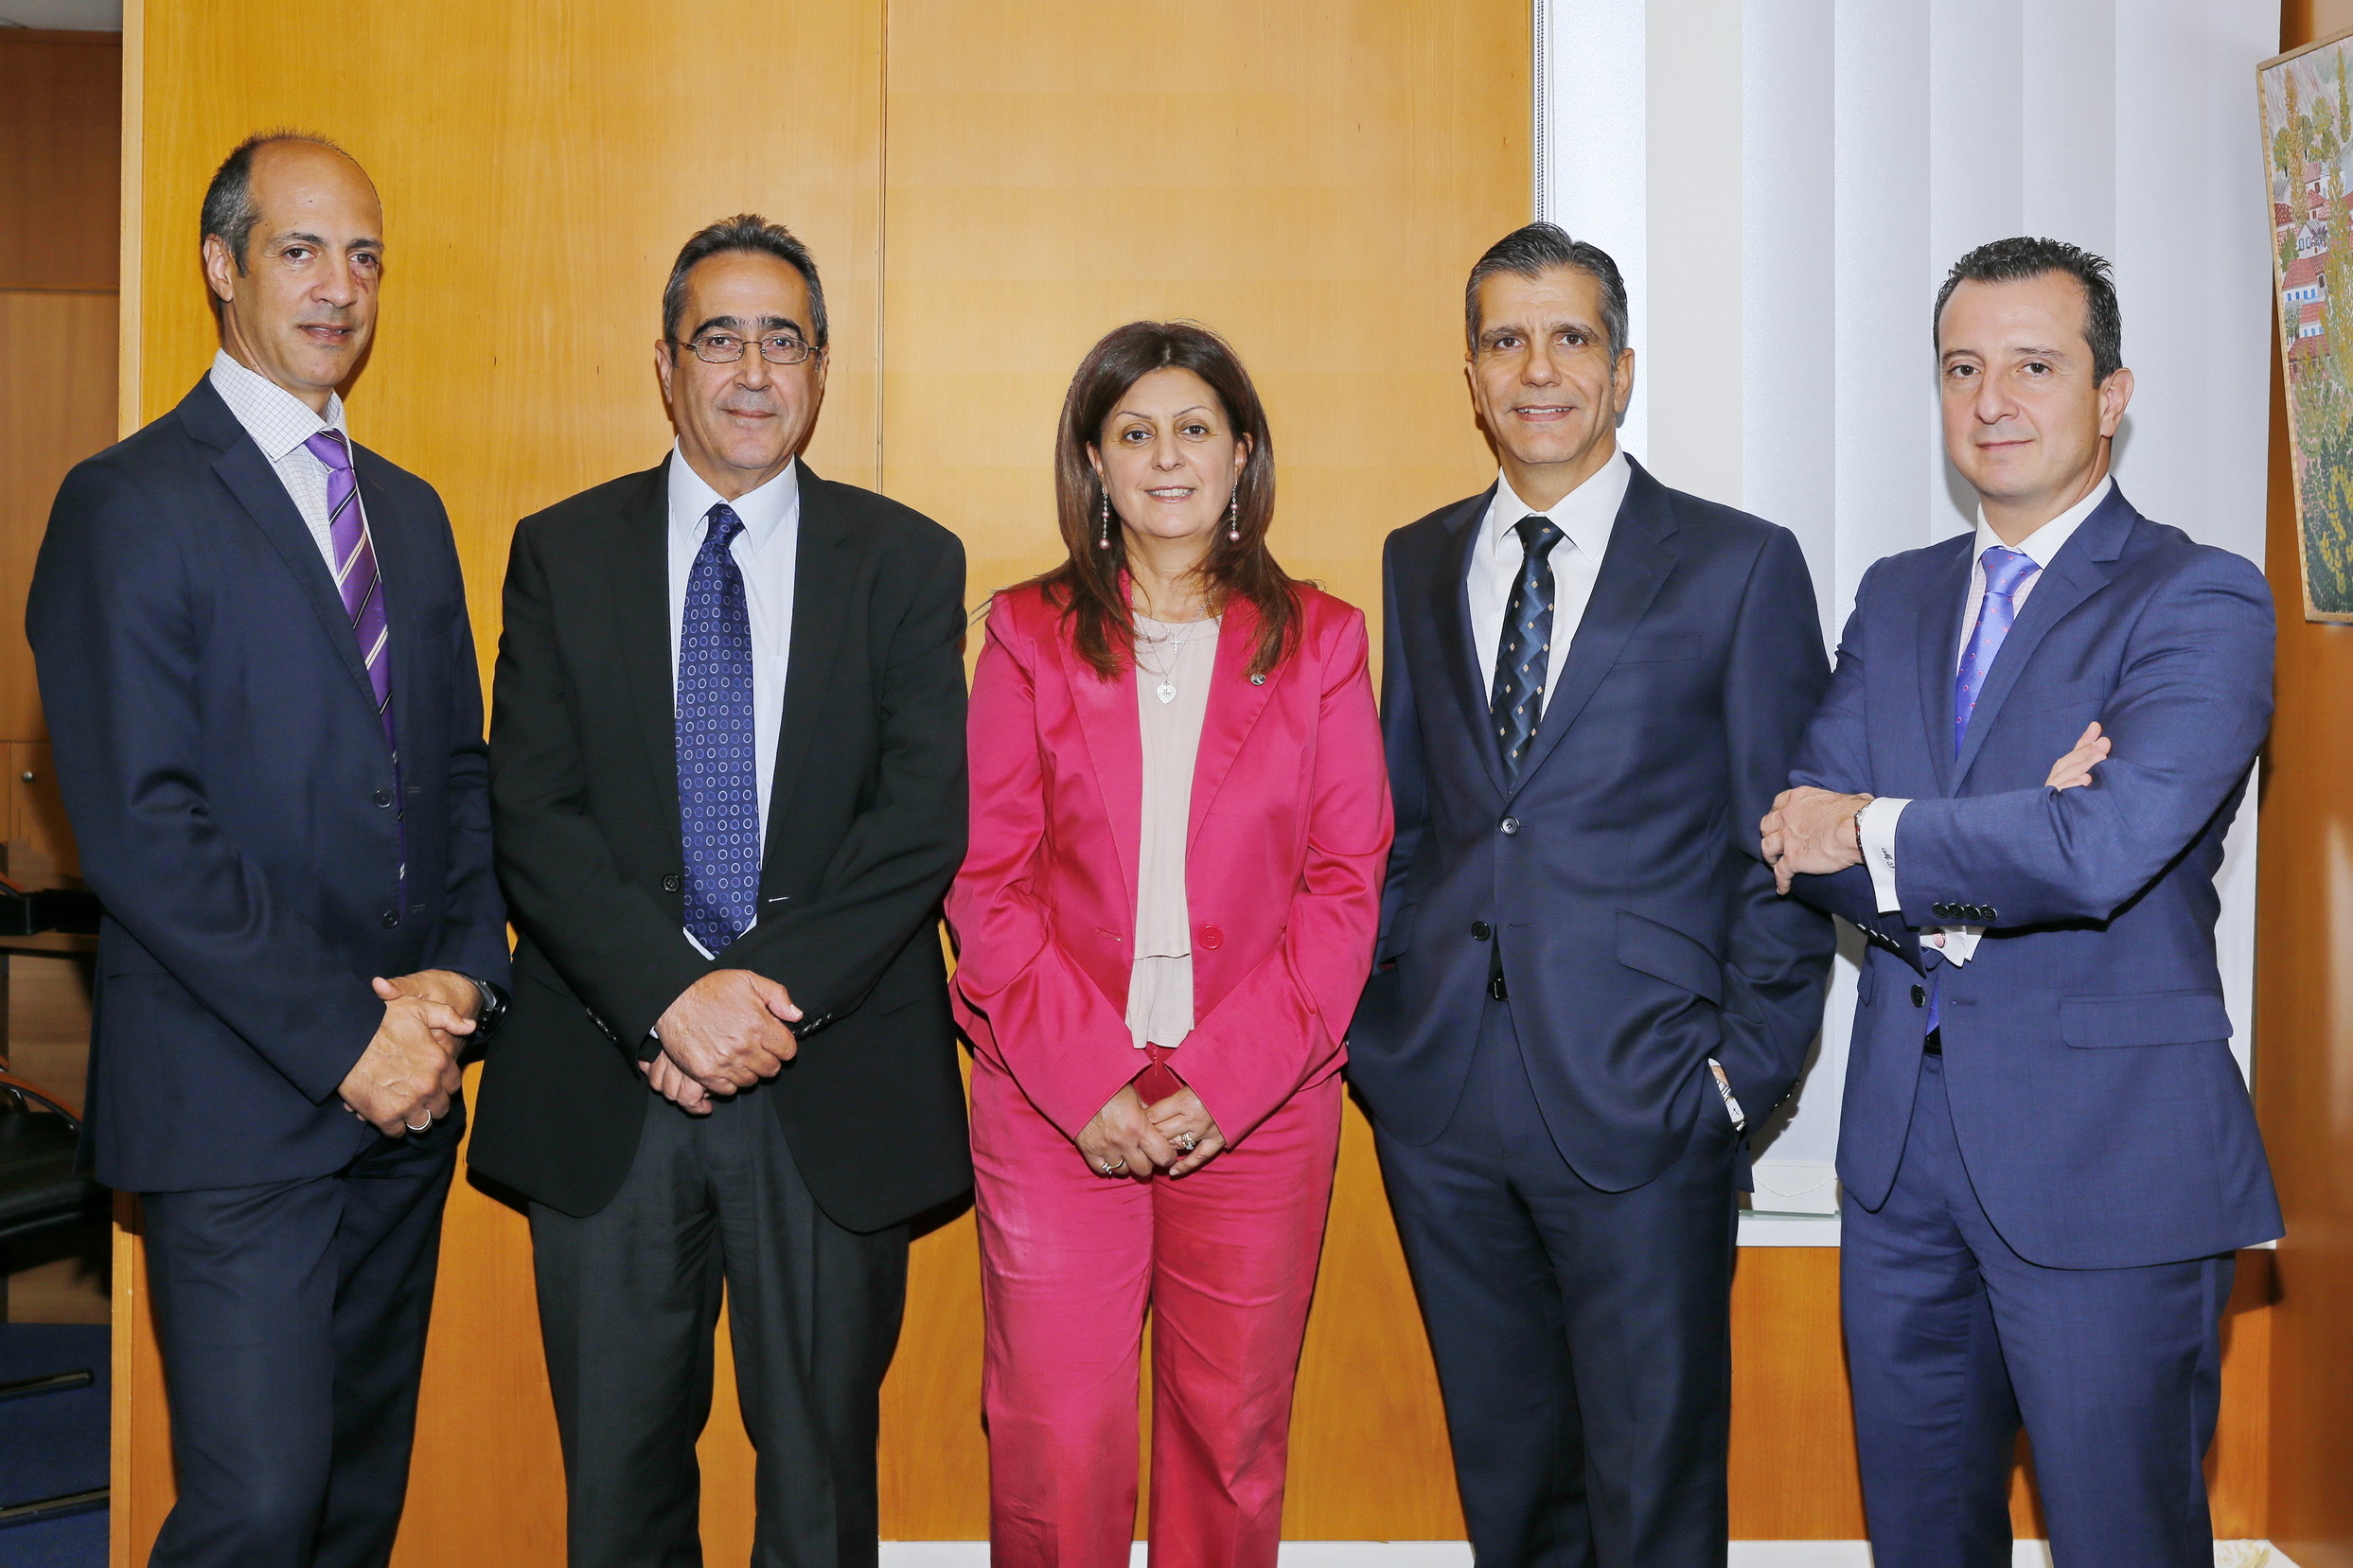  Cyprus Chapter Leaders. From left to right: Agis Taramides, George Rostantis, Dr. Maria Kambia-Kapardis, George Zornas, and Marios Skandalis 